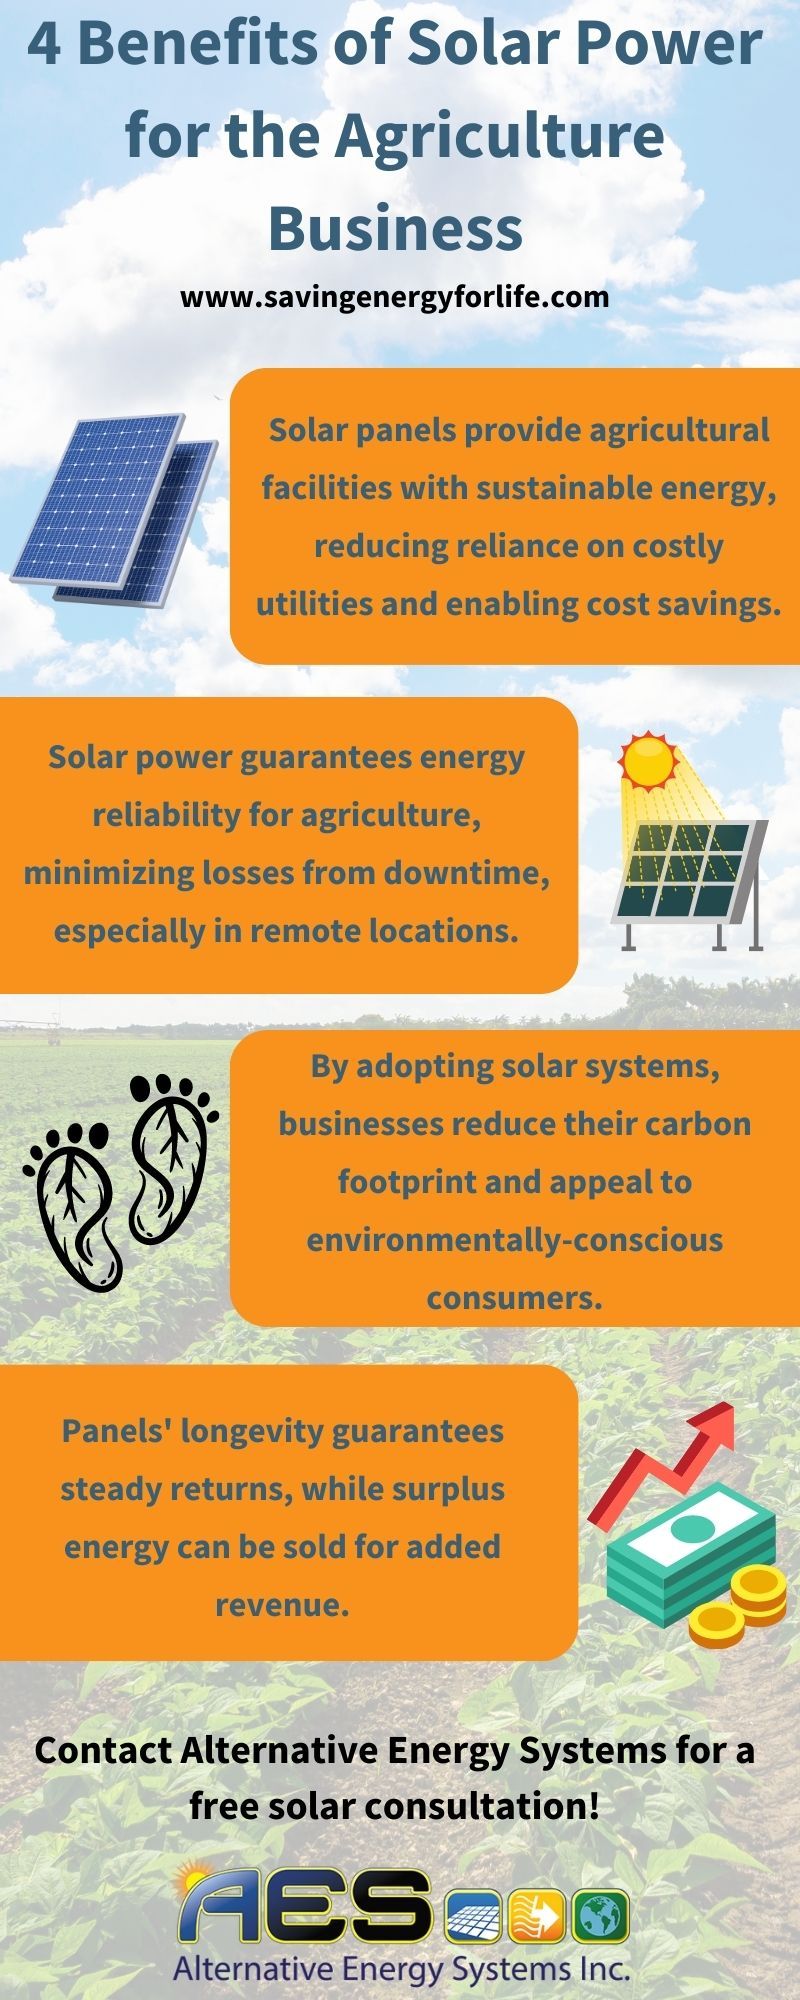 4 Benefits of Solar Power for the Agriculture Business.jpg